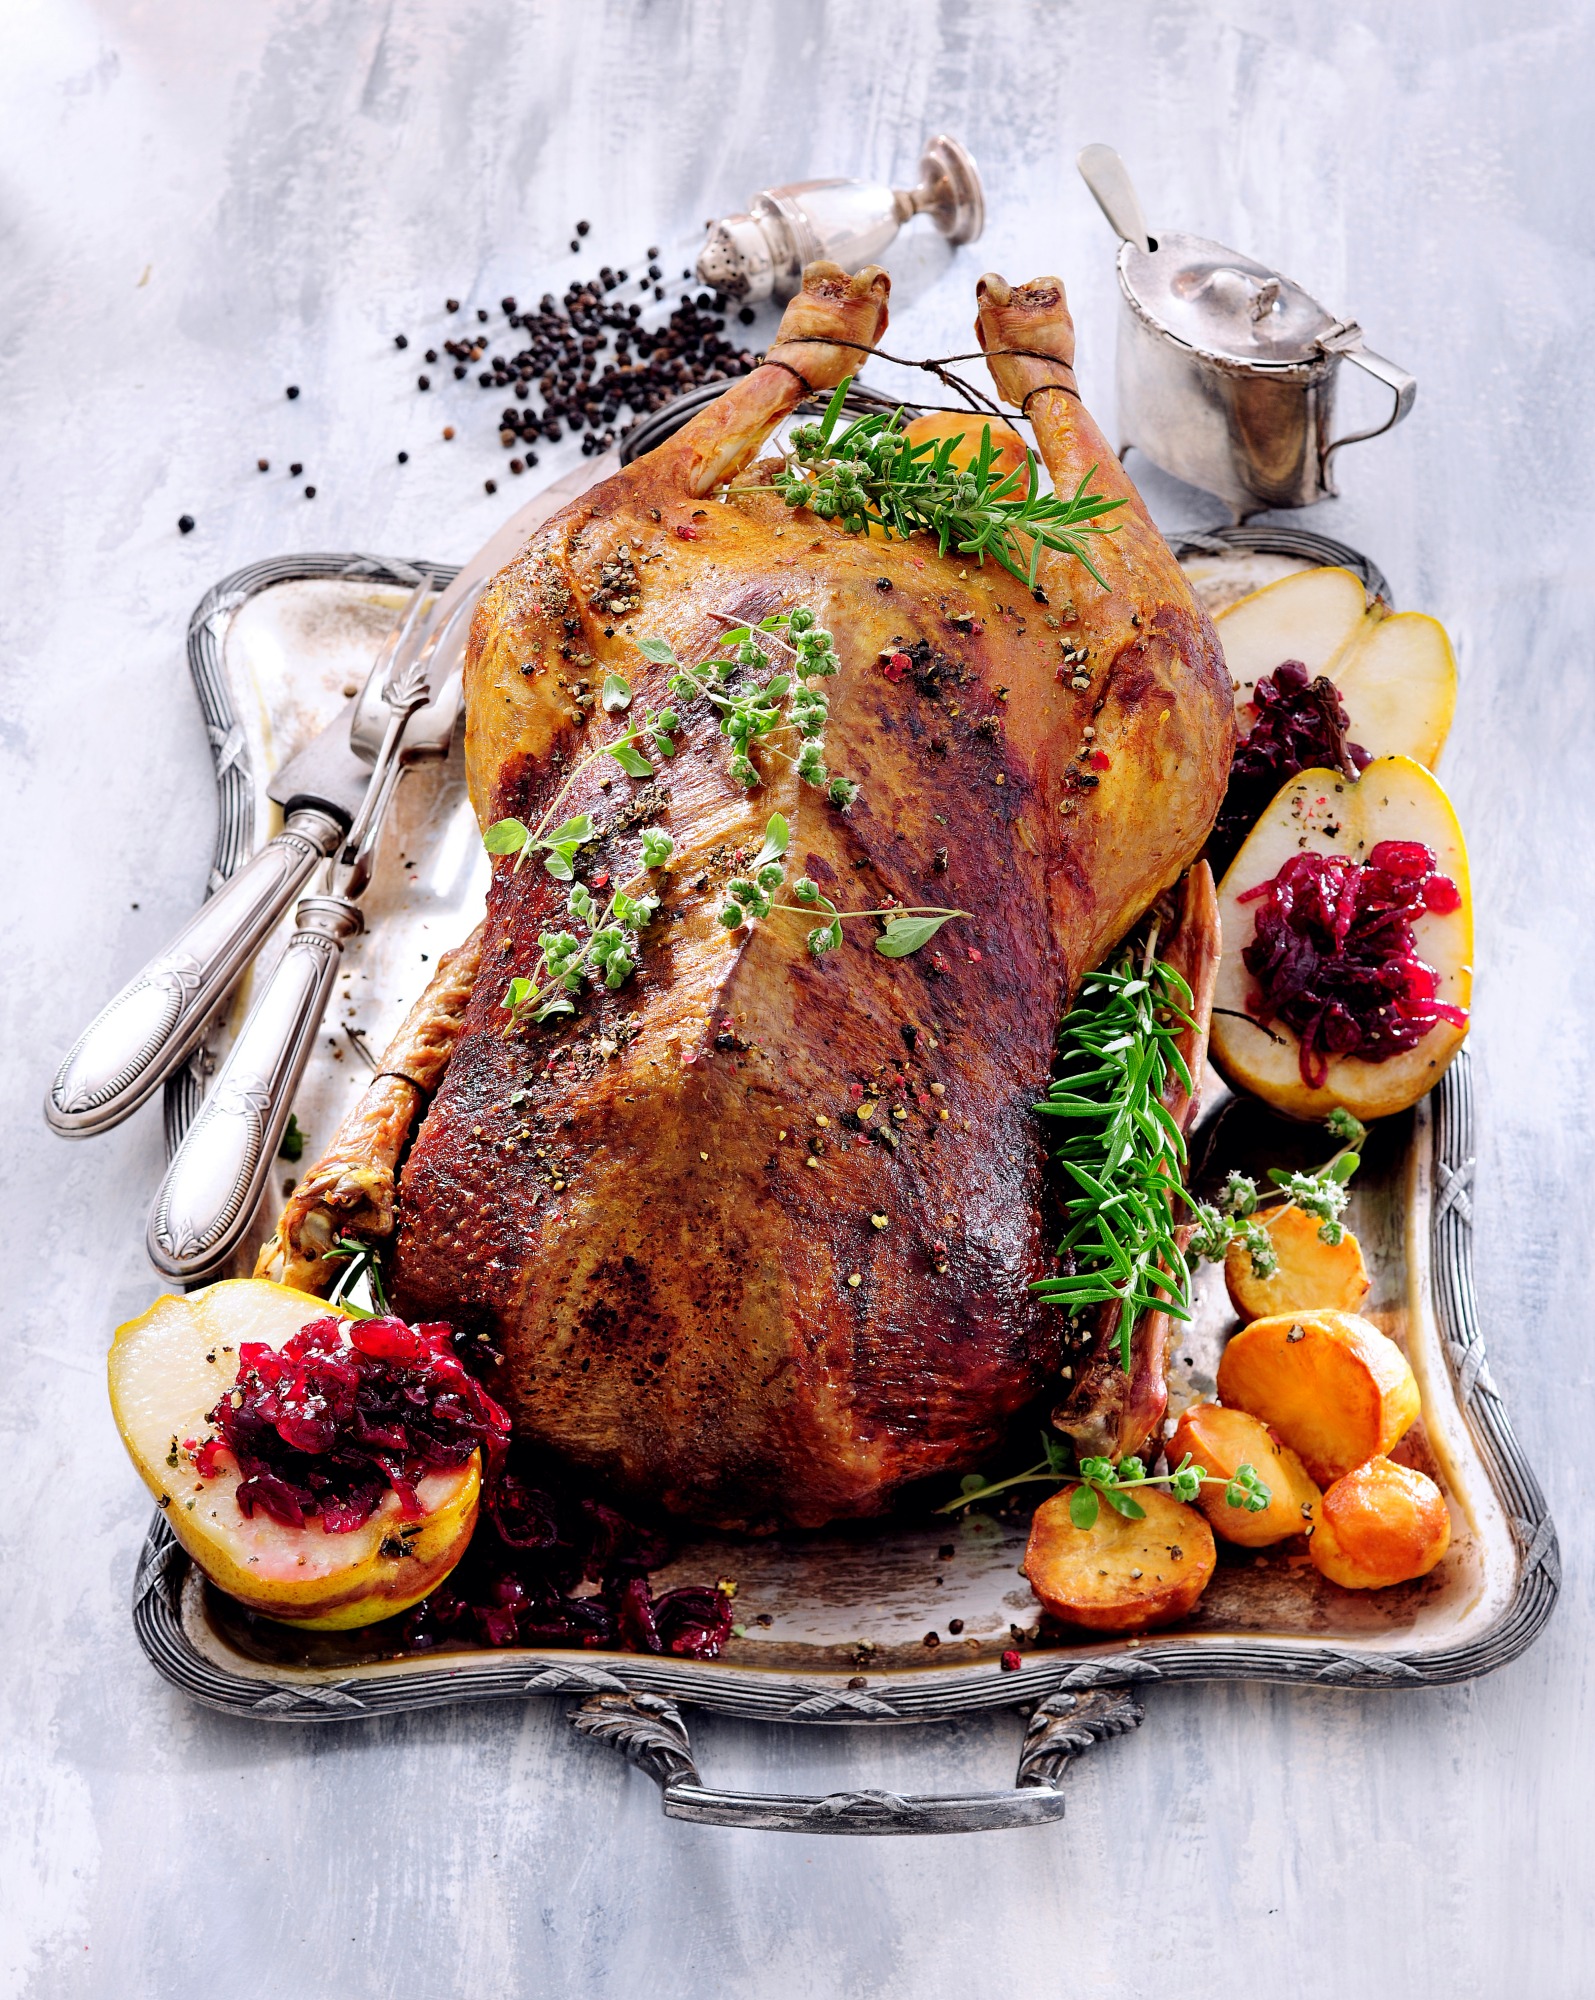 A Roast Goose Recipe fit for the Christmas Table